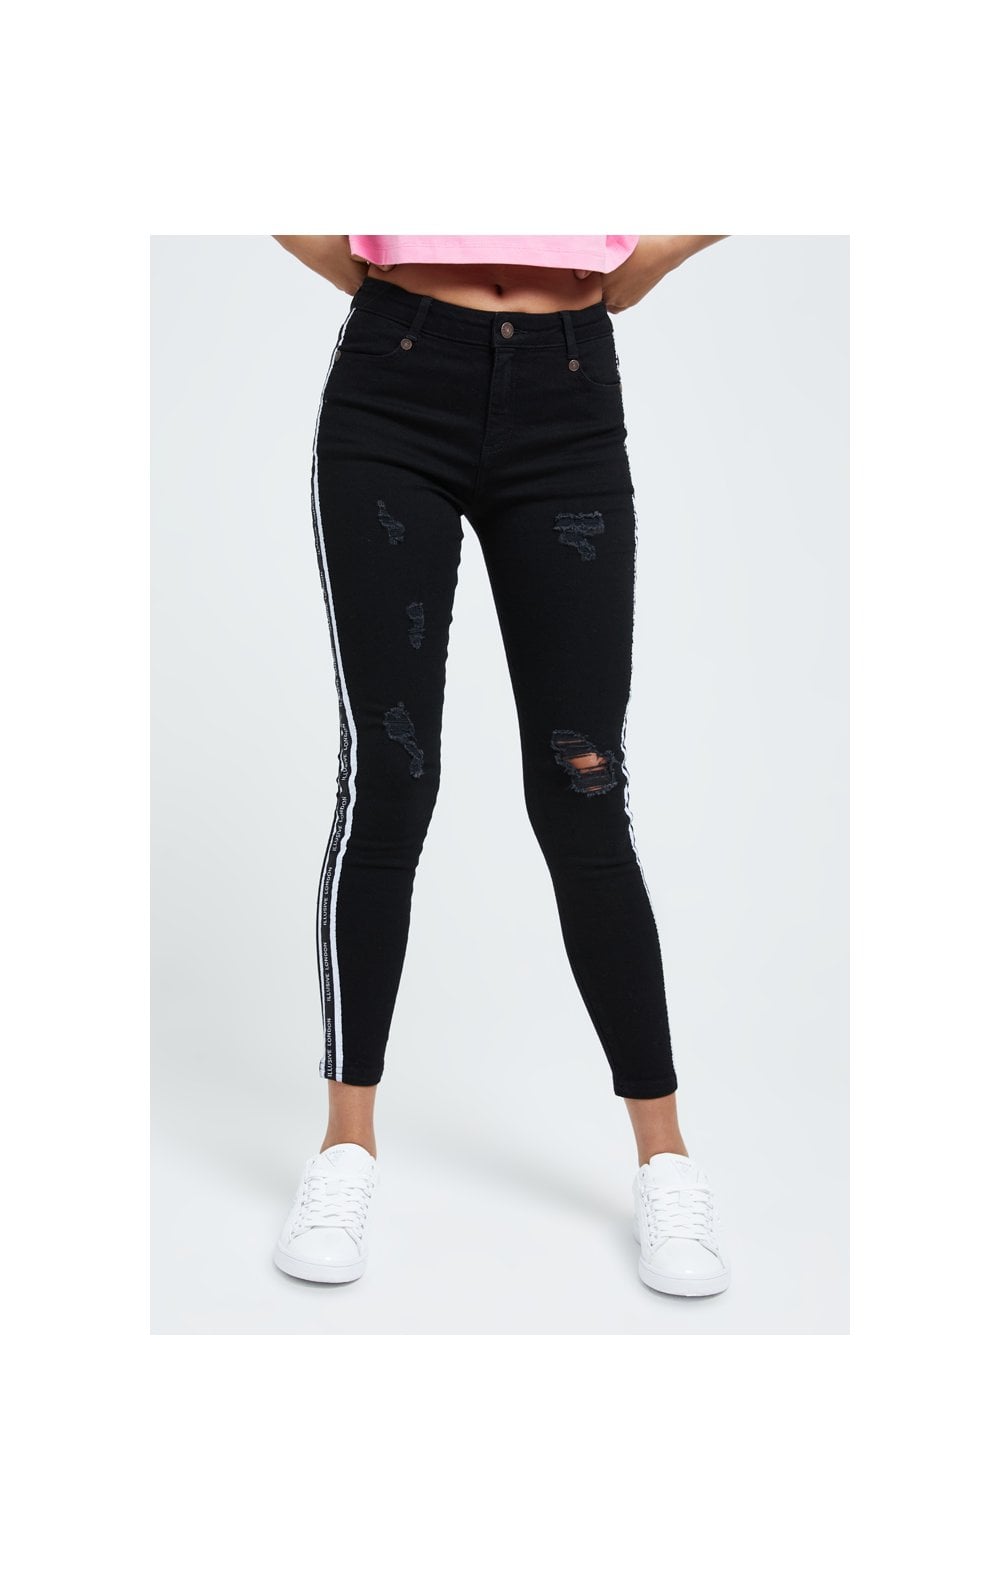 Load image into Gallery viewer, Illusive London Tape Distressed Skinny Jeans - Black